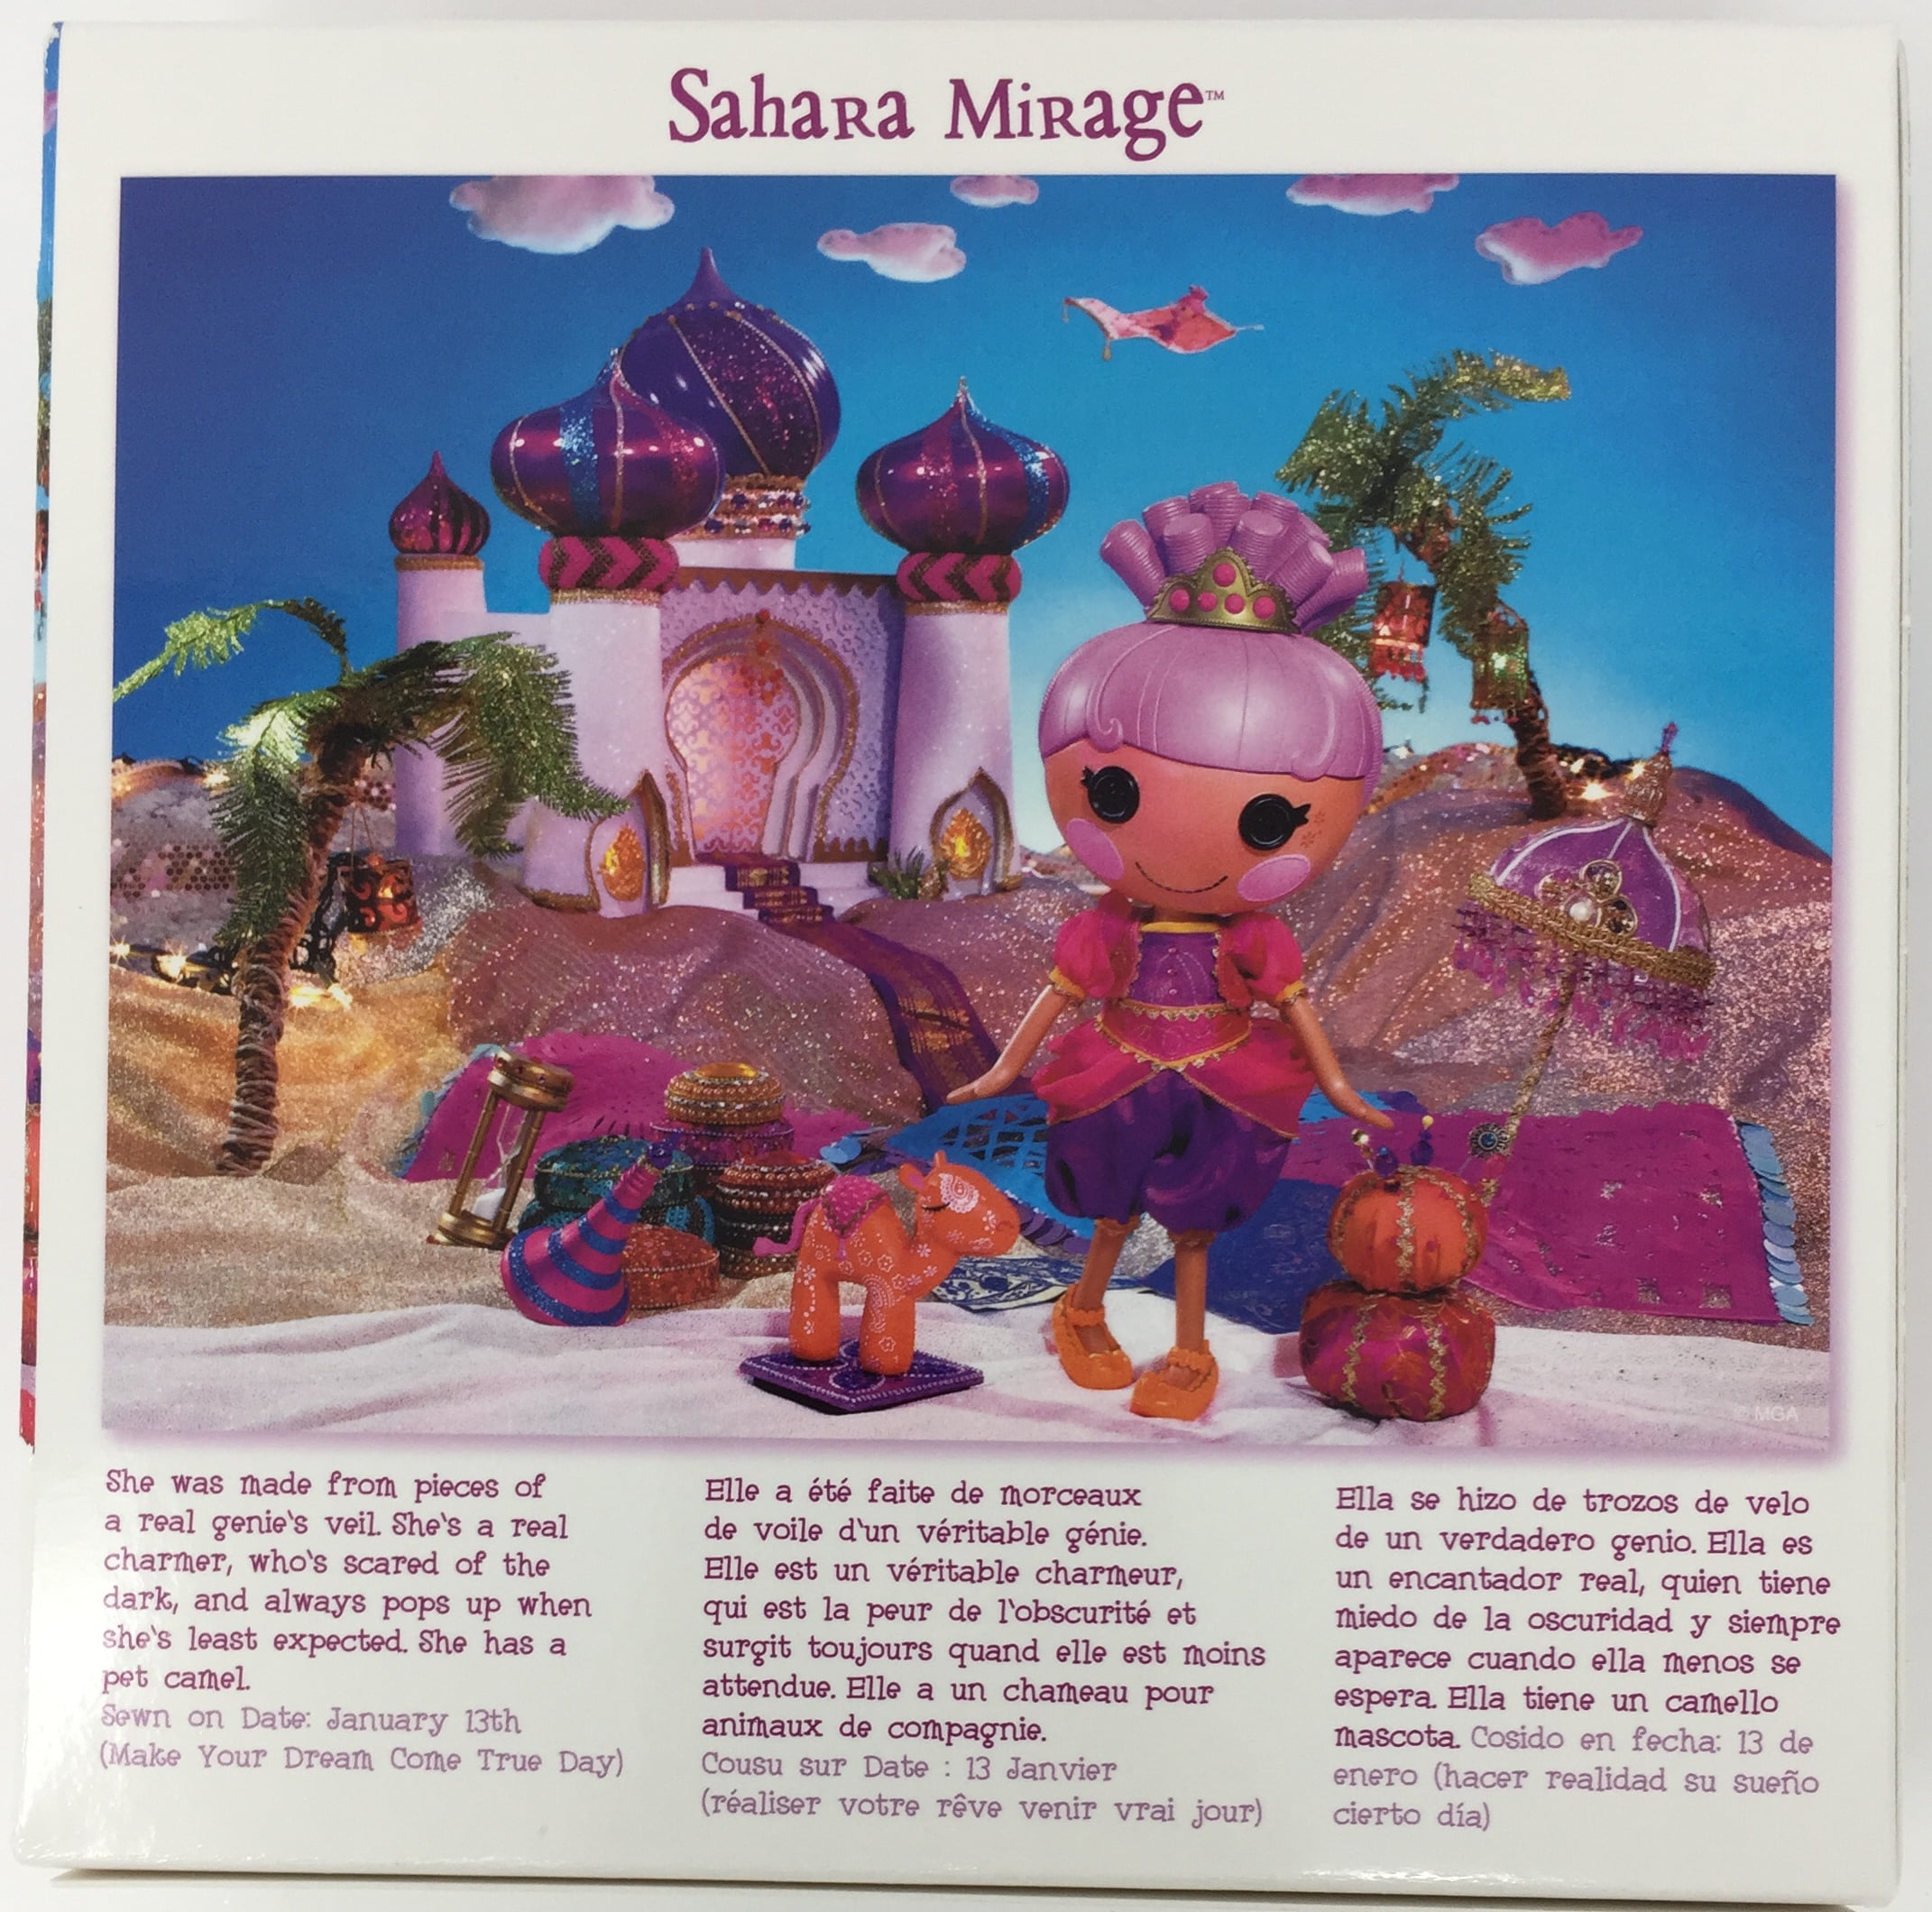 Lalaloopsy Glitter Series Puzzle Sahara Mirage 60 piece by Ceaco SEALED NEW 